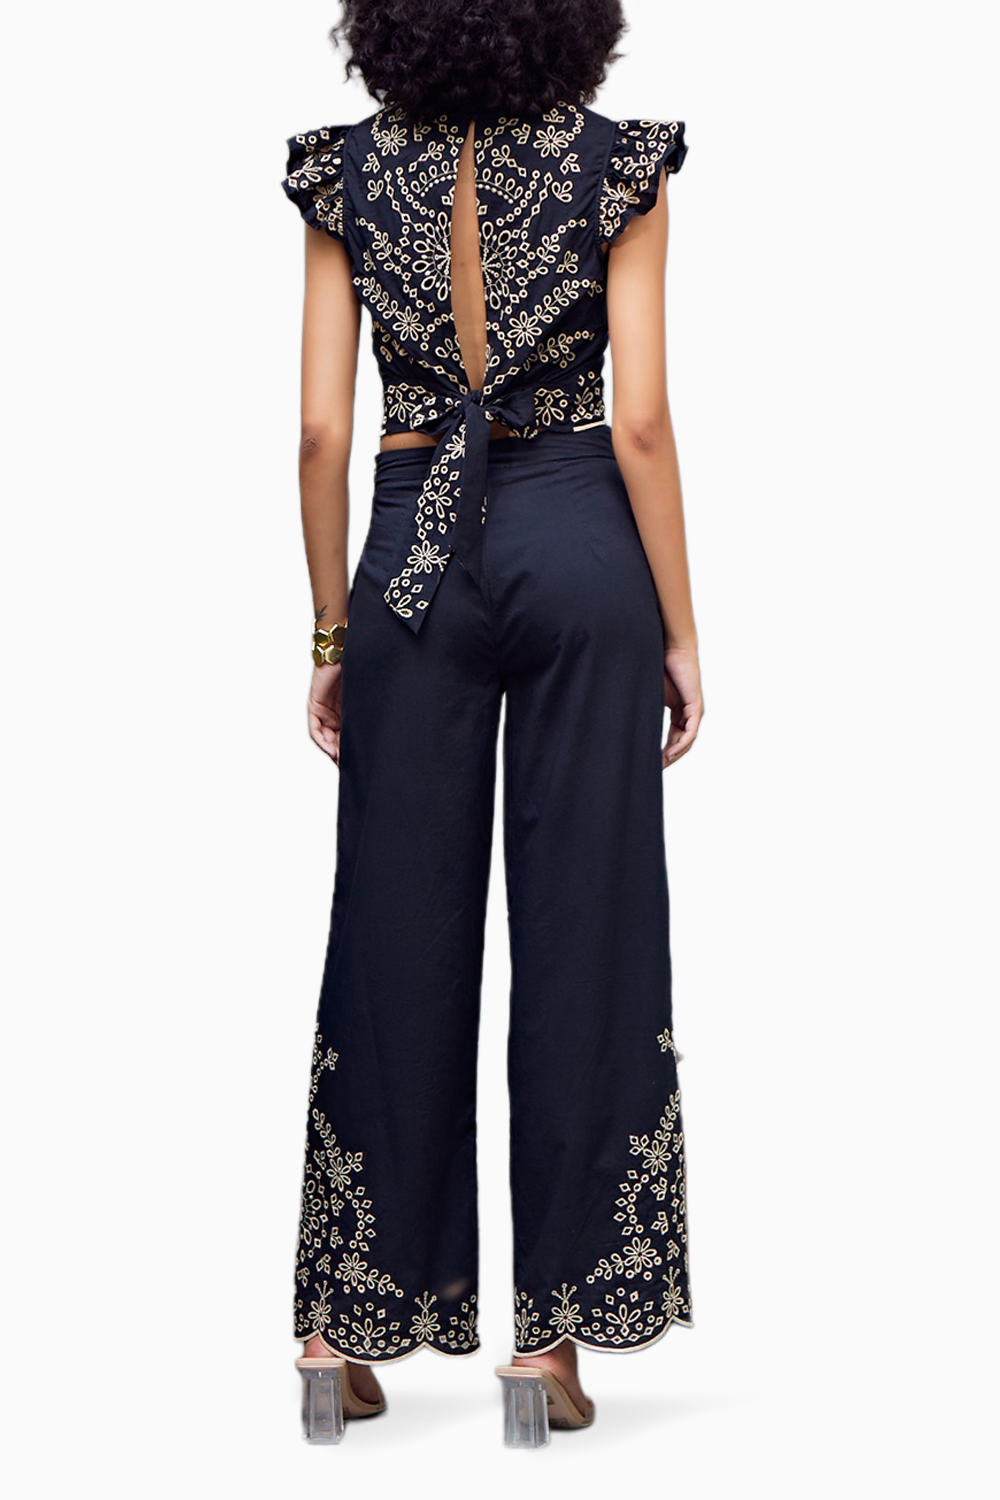 Romneya Black Embroidered Trousers